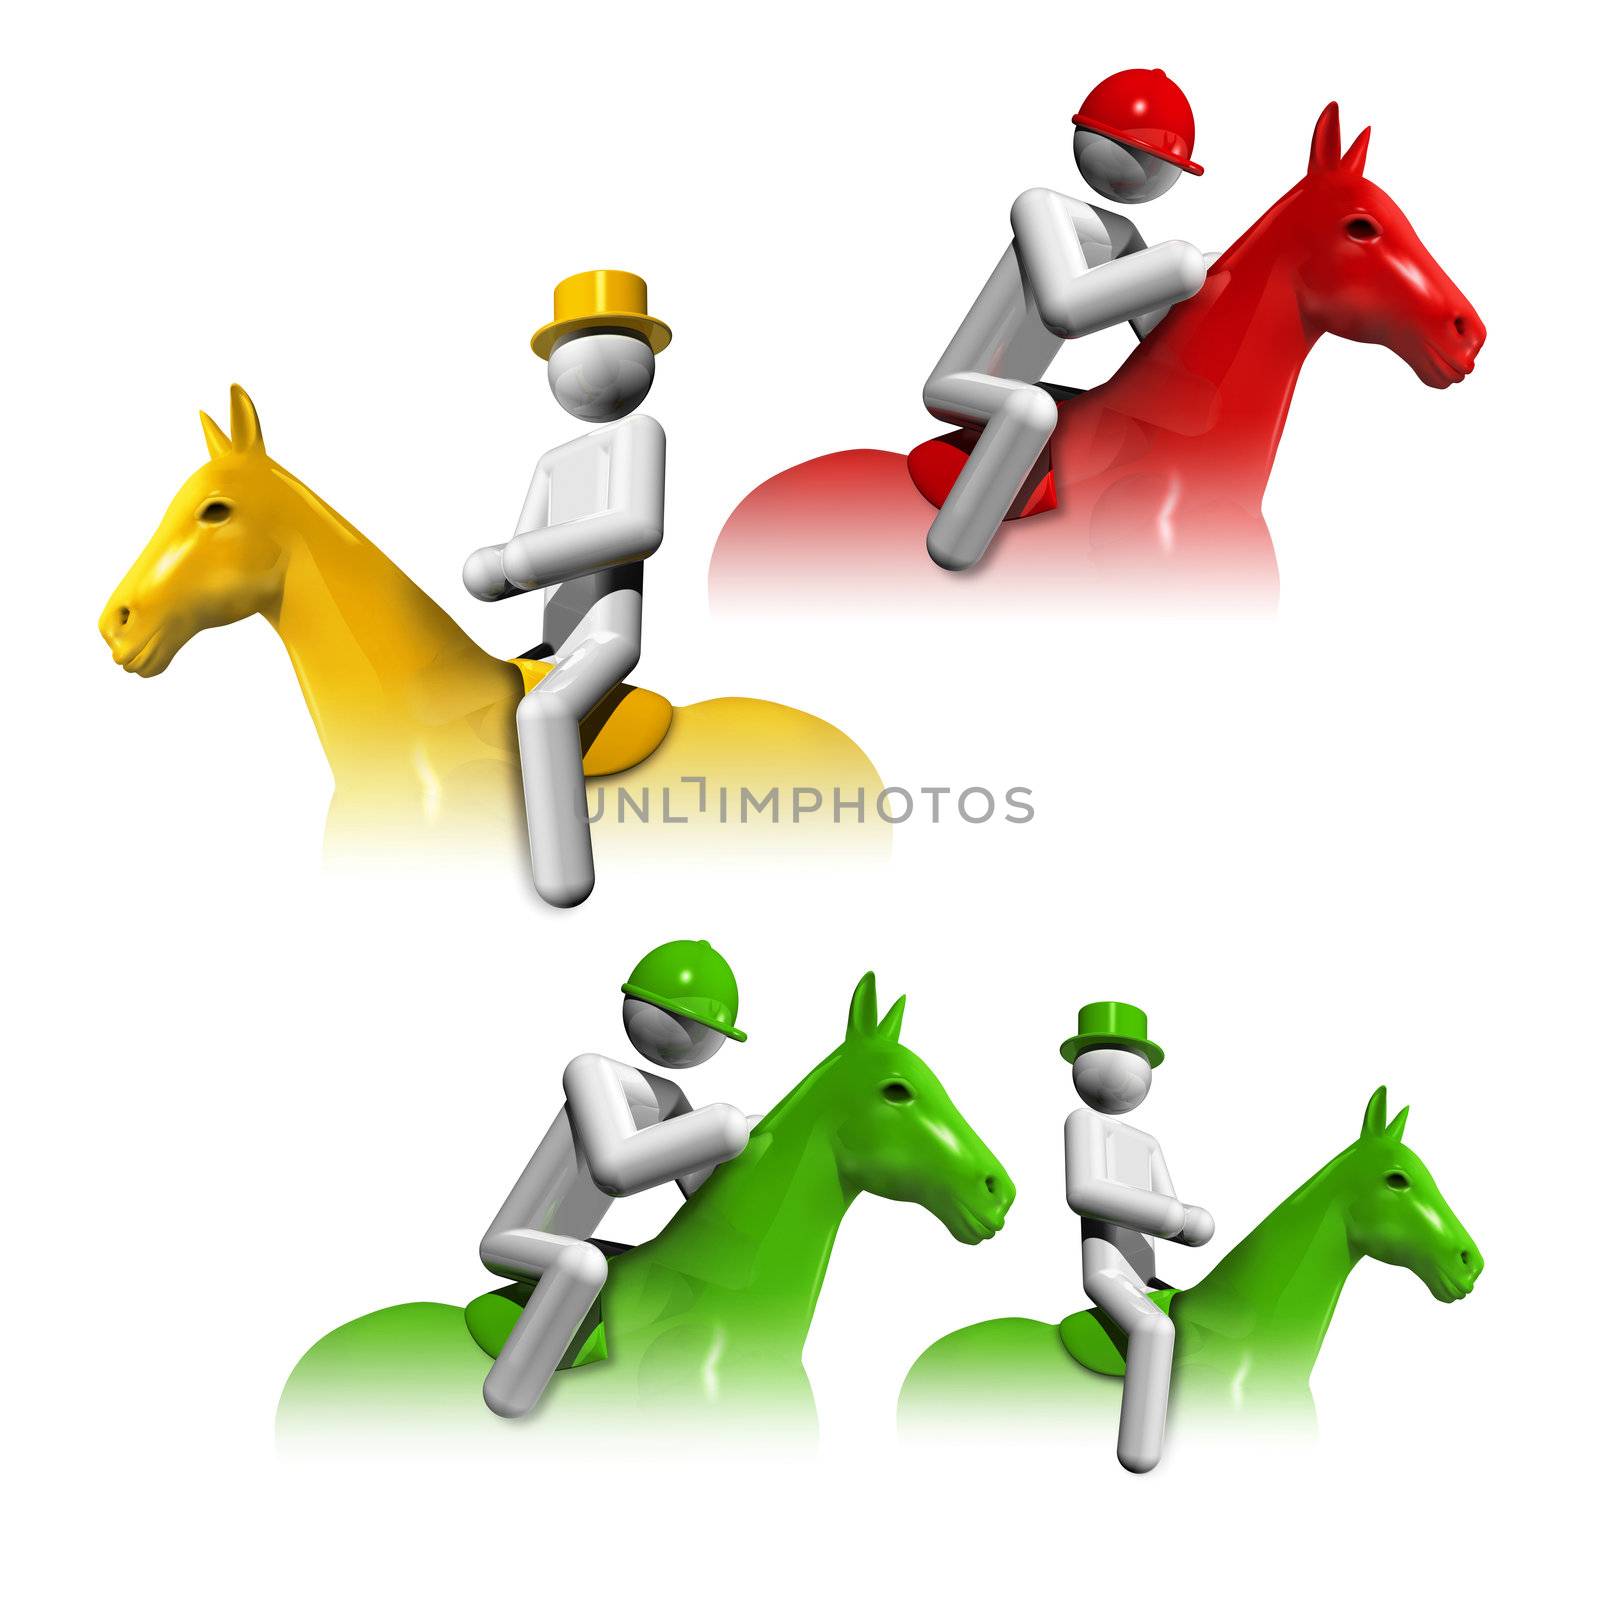 sports symbols icons series 6 on 9, equestrian dressage, jumping, eventing